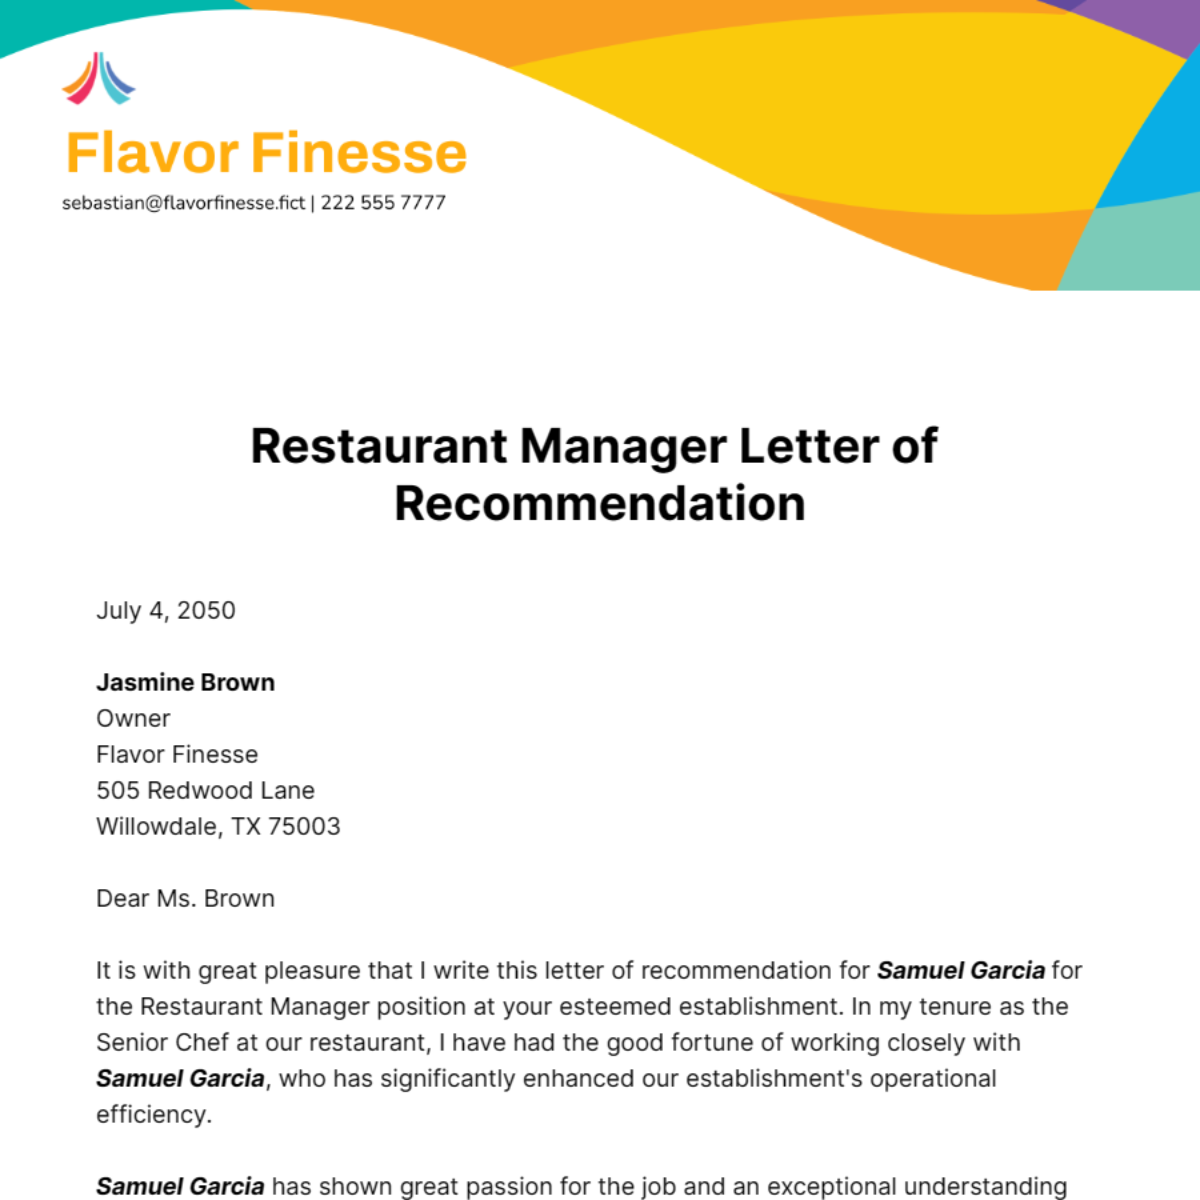 Restaurant Manager Letter of Recommendation Template